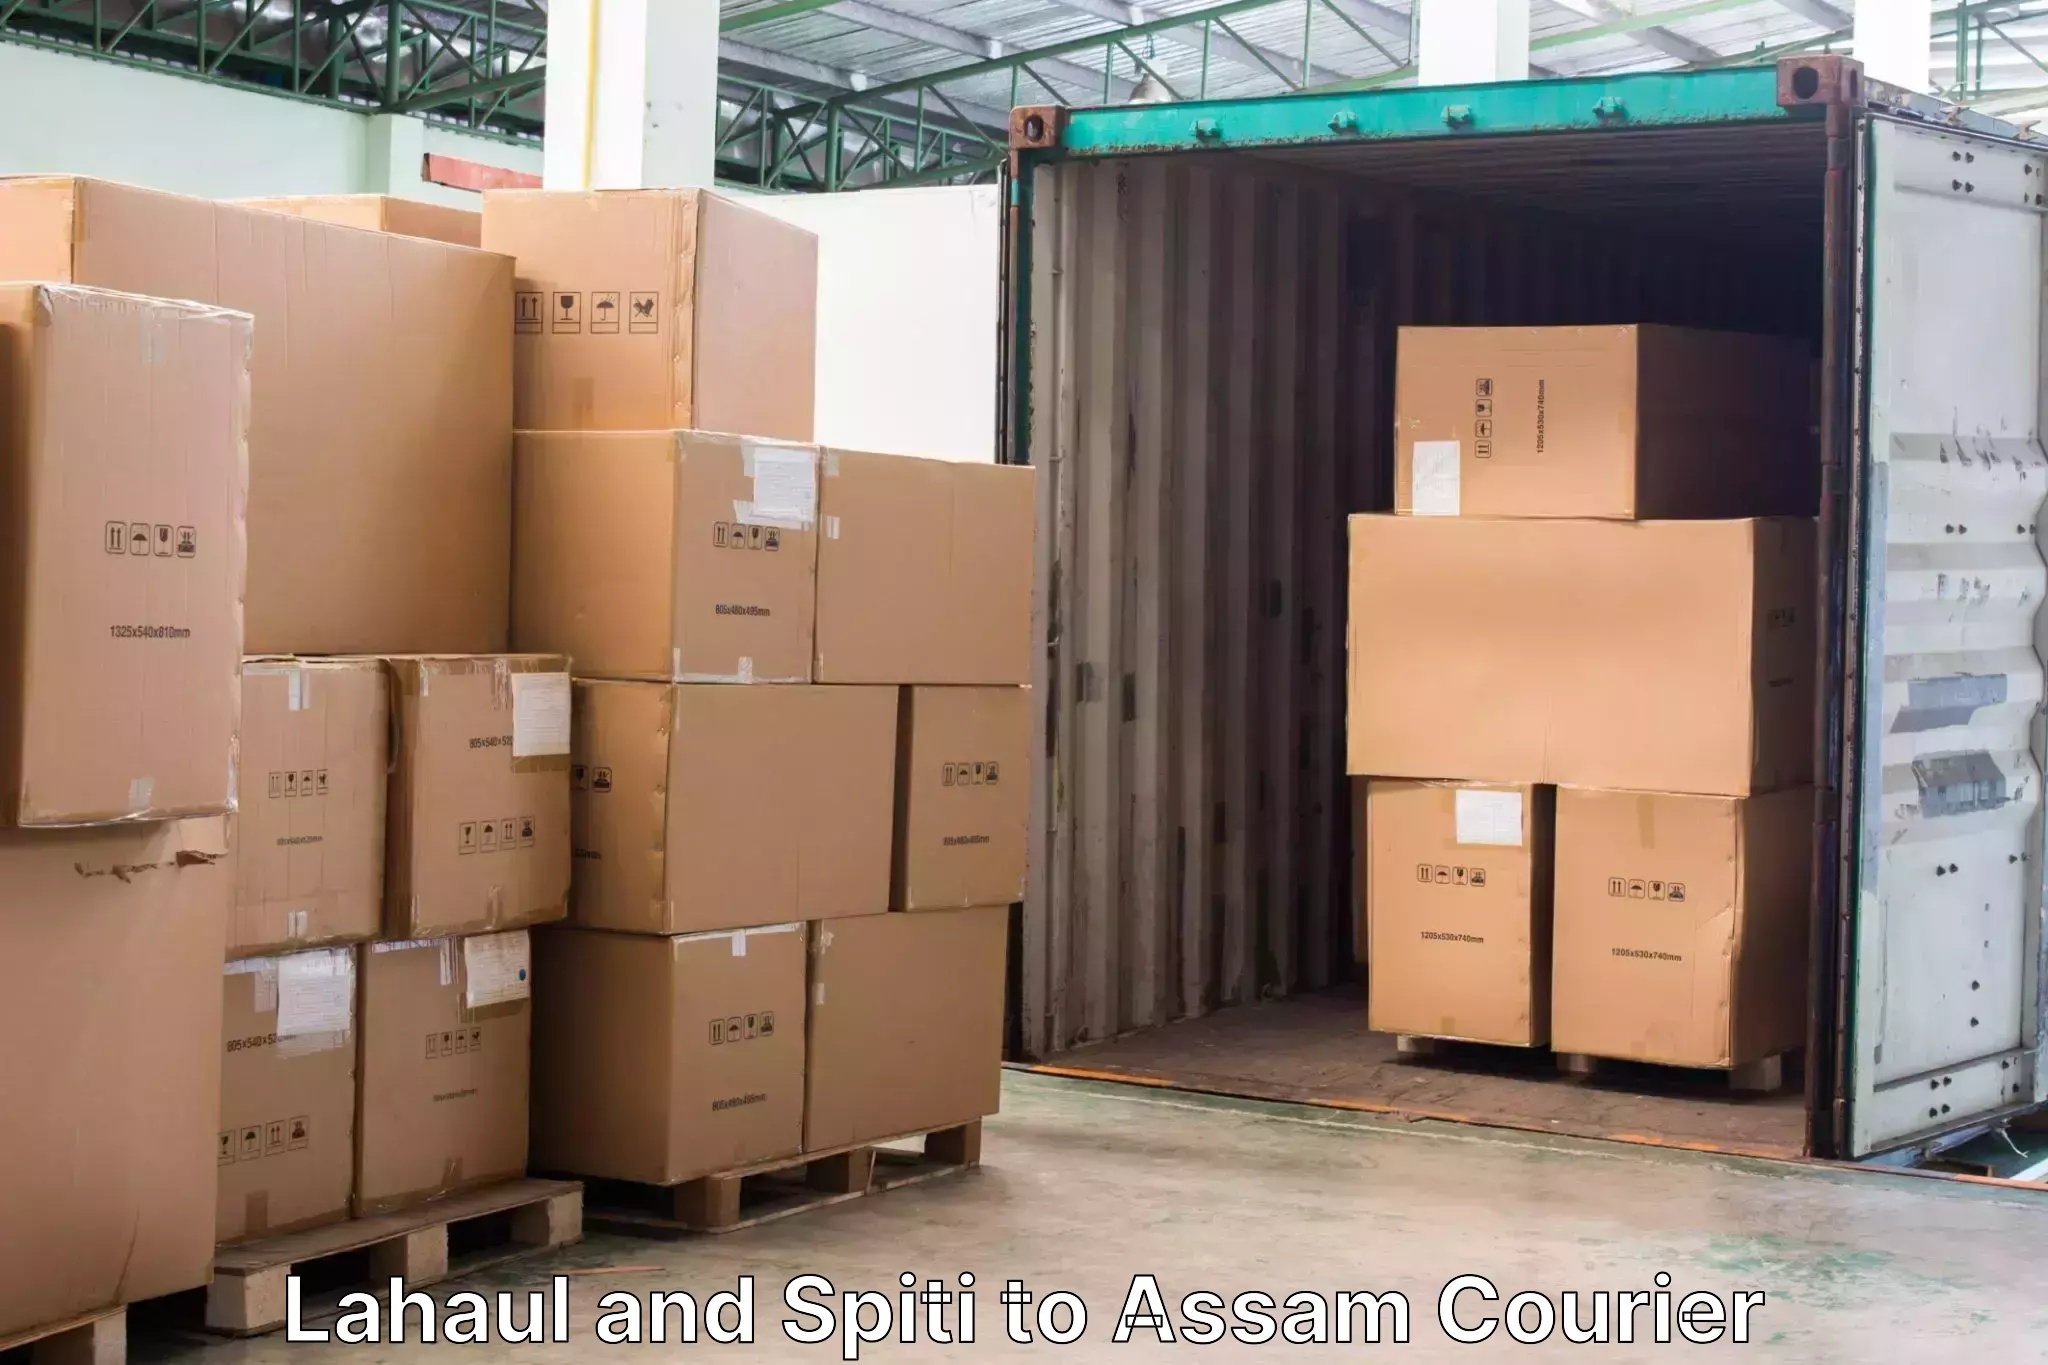 Baggage transport scheduler Lahaul and Spiti to Assam